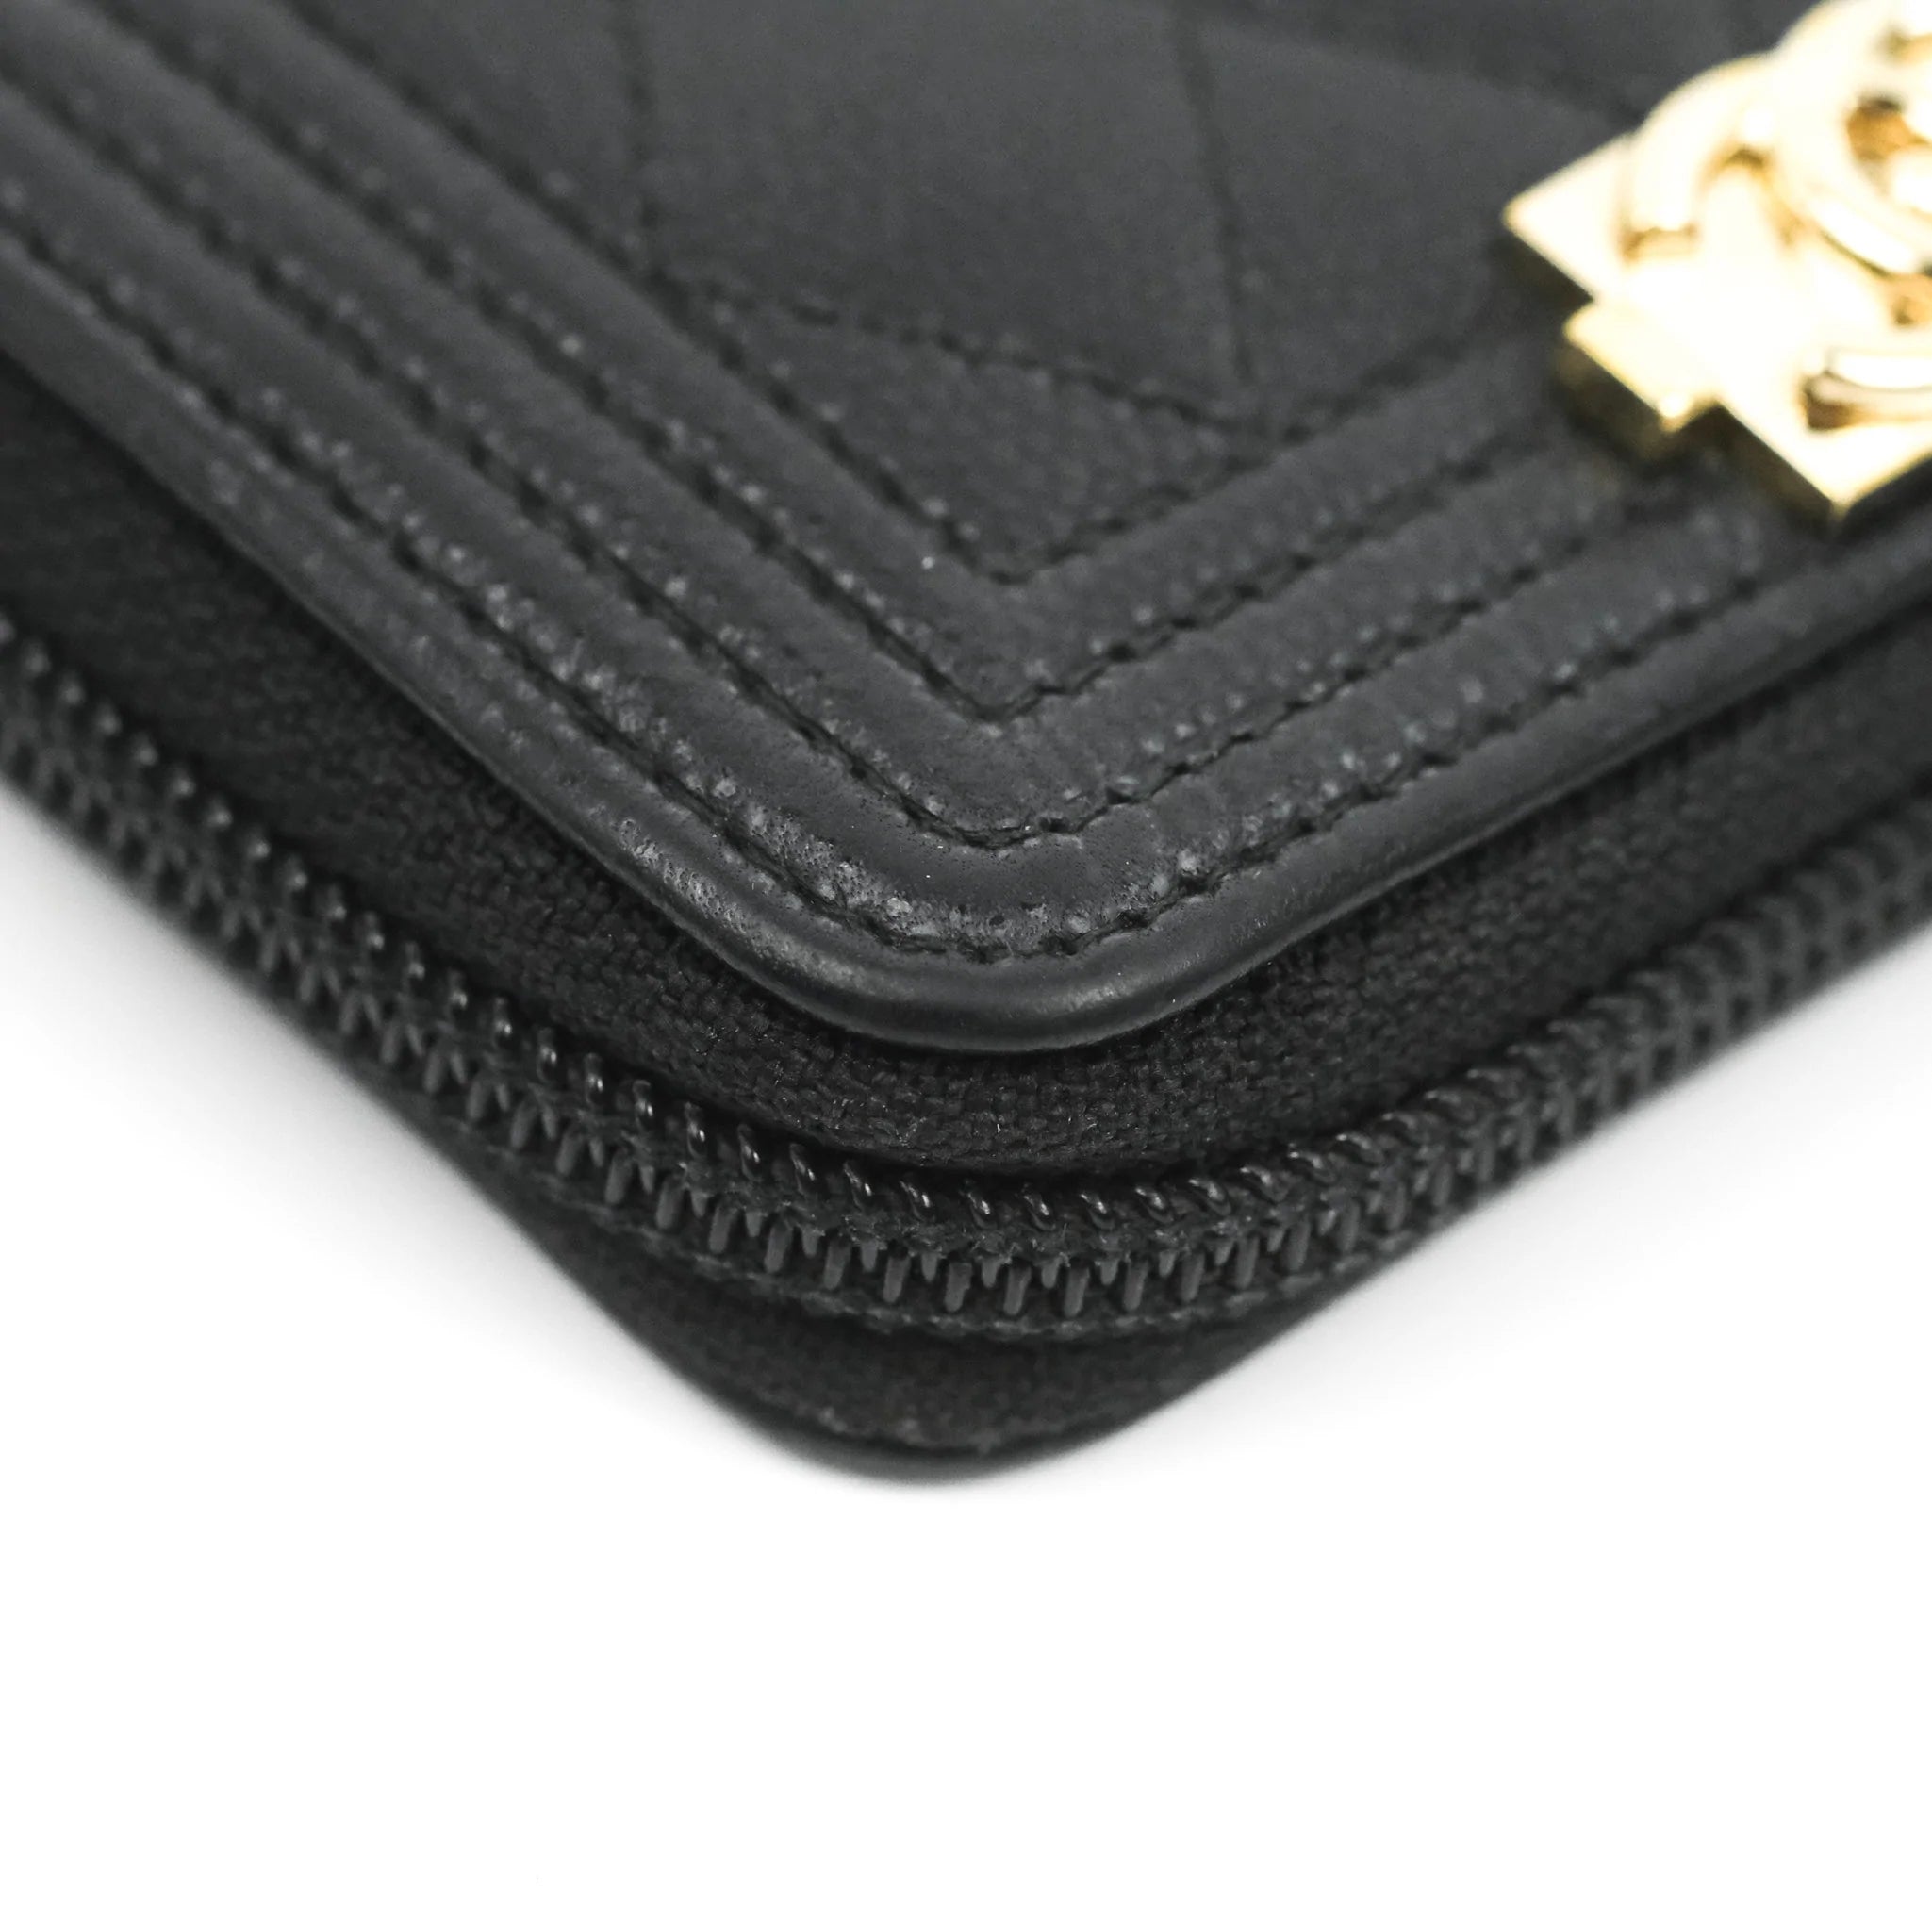 Chanel Le Boy Double Zip Wallet On Chain Caviar Black Aged Gold Hardwa –  Coco Approved Studio